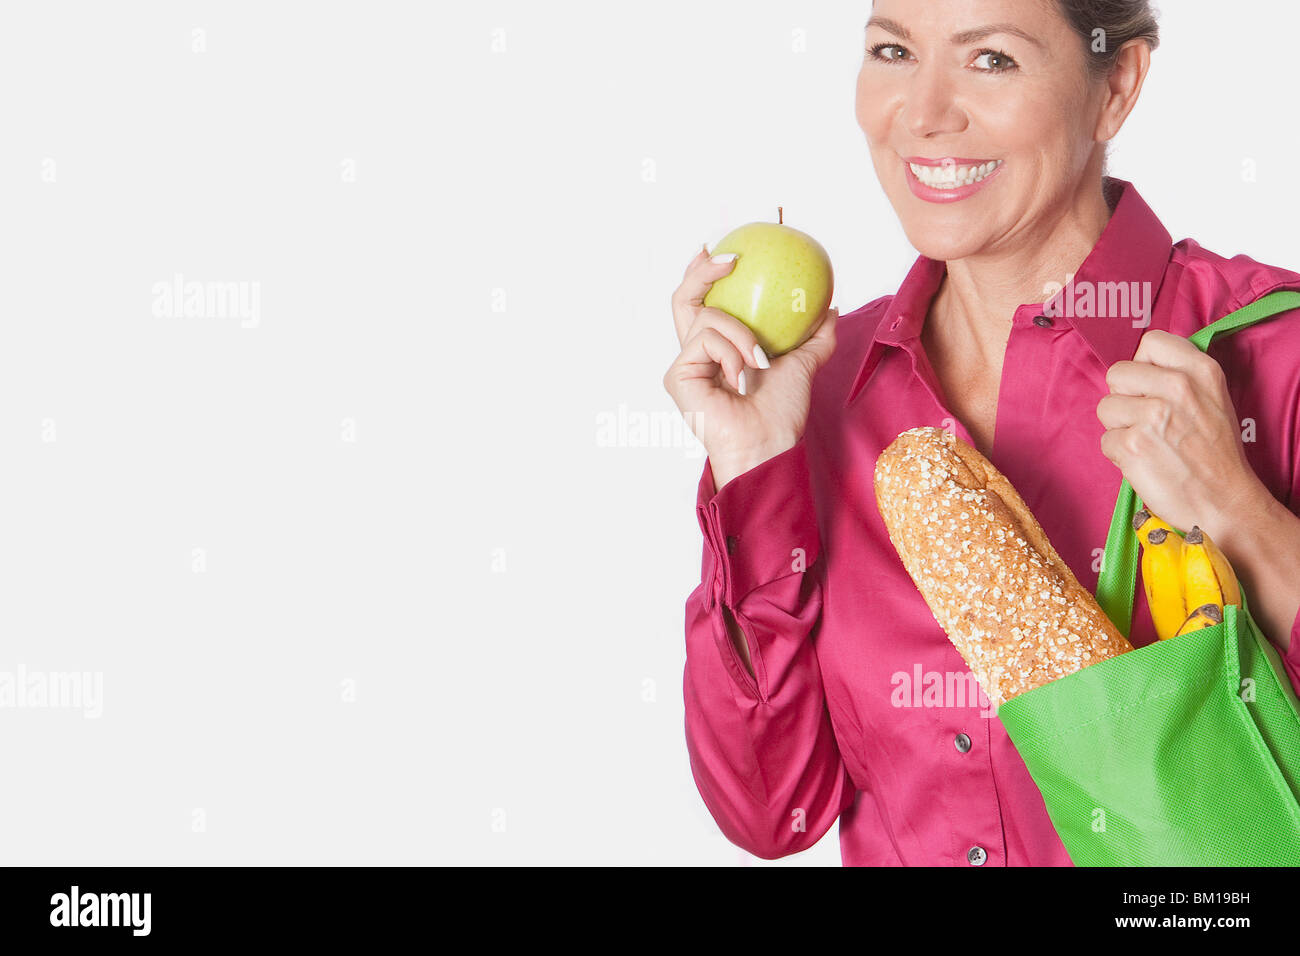 Woman holding a shopping bag of groceries with fruits Stock Photo